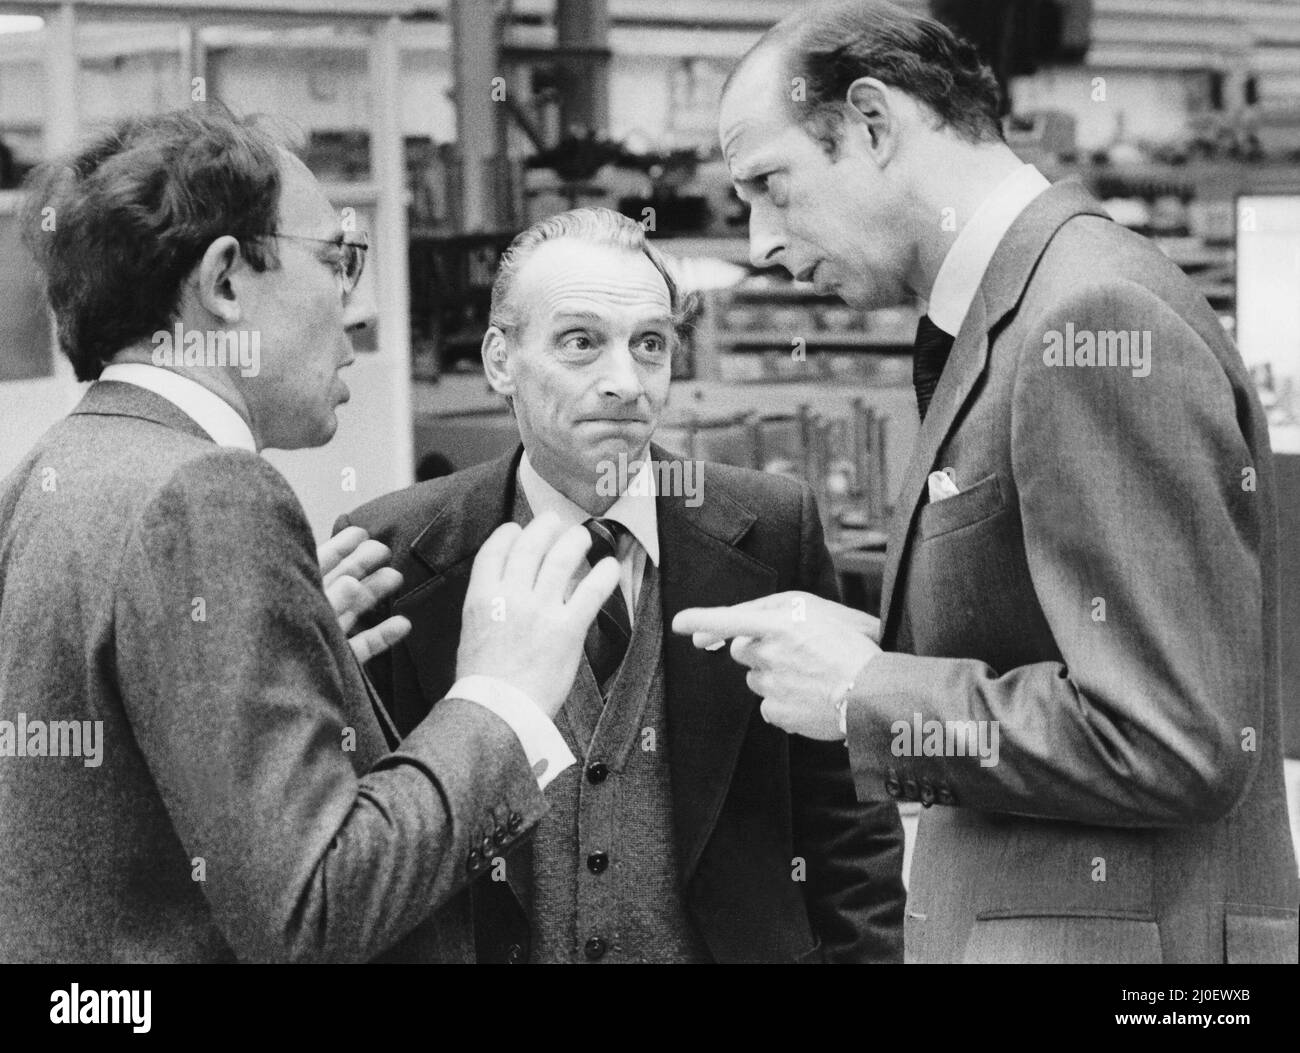 Prince Edward of Kent - The Duke and Duchess of Kent  North East Royal Visits  The Duke of Kent during his visit to Newcastle 8 July 1980 - The Duke with Andrew Perkins MD and Union rep Jimmy Kirr, right, at NEI Reyrolle, Hebburn Factory Stock Photo